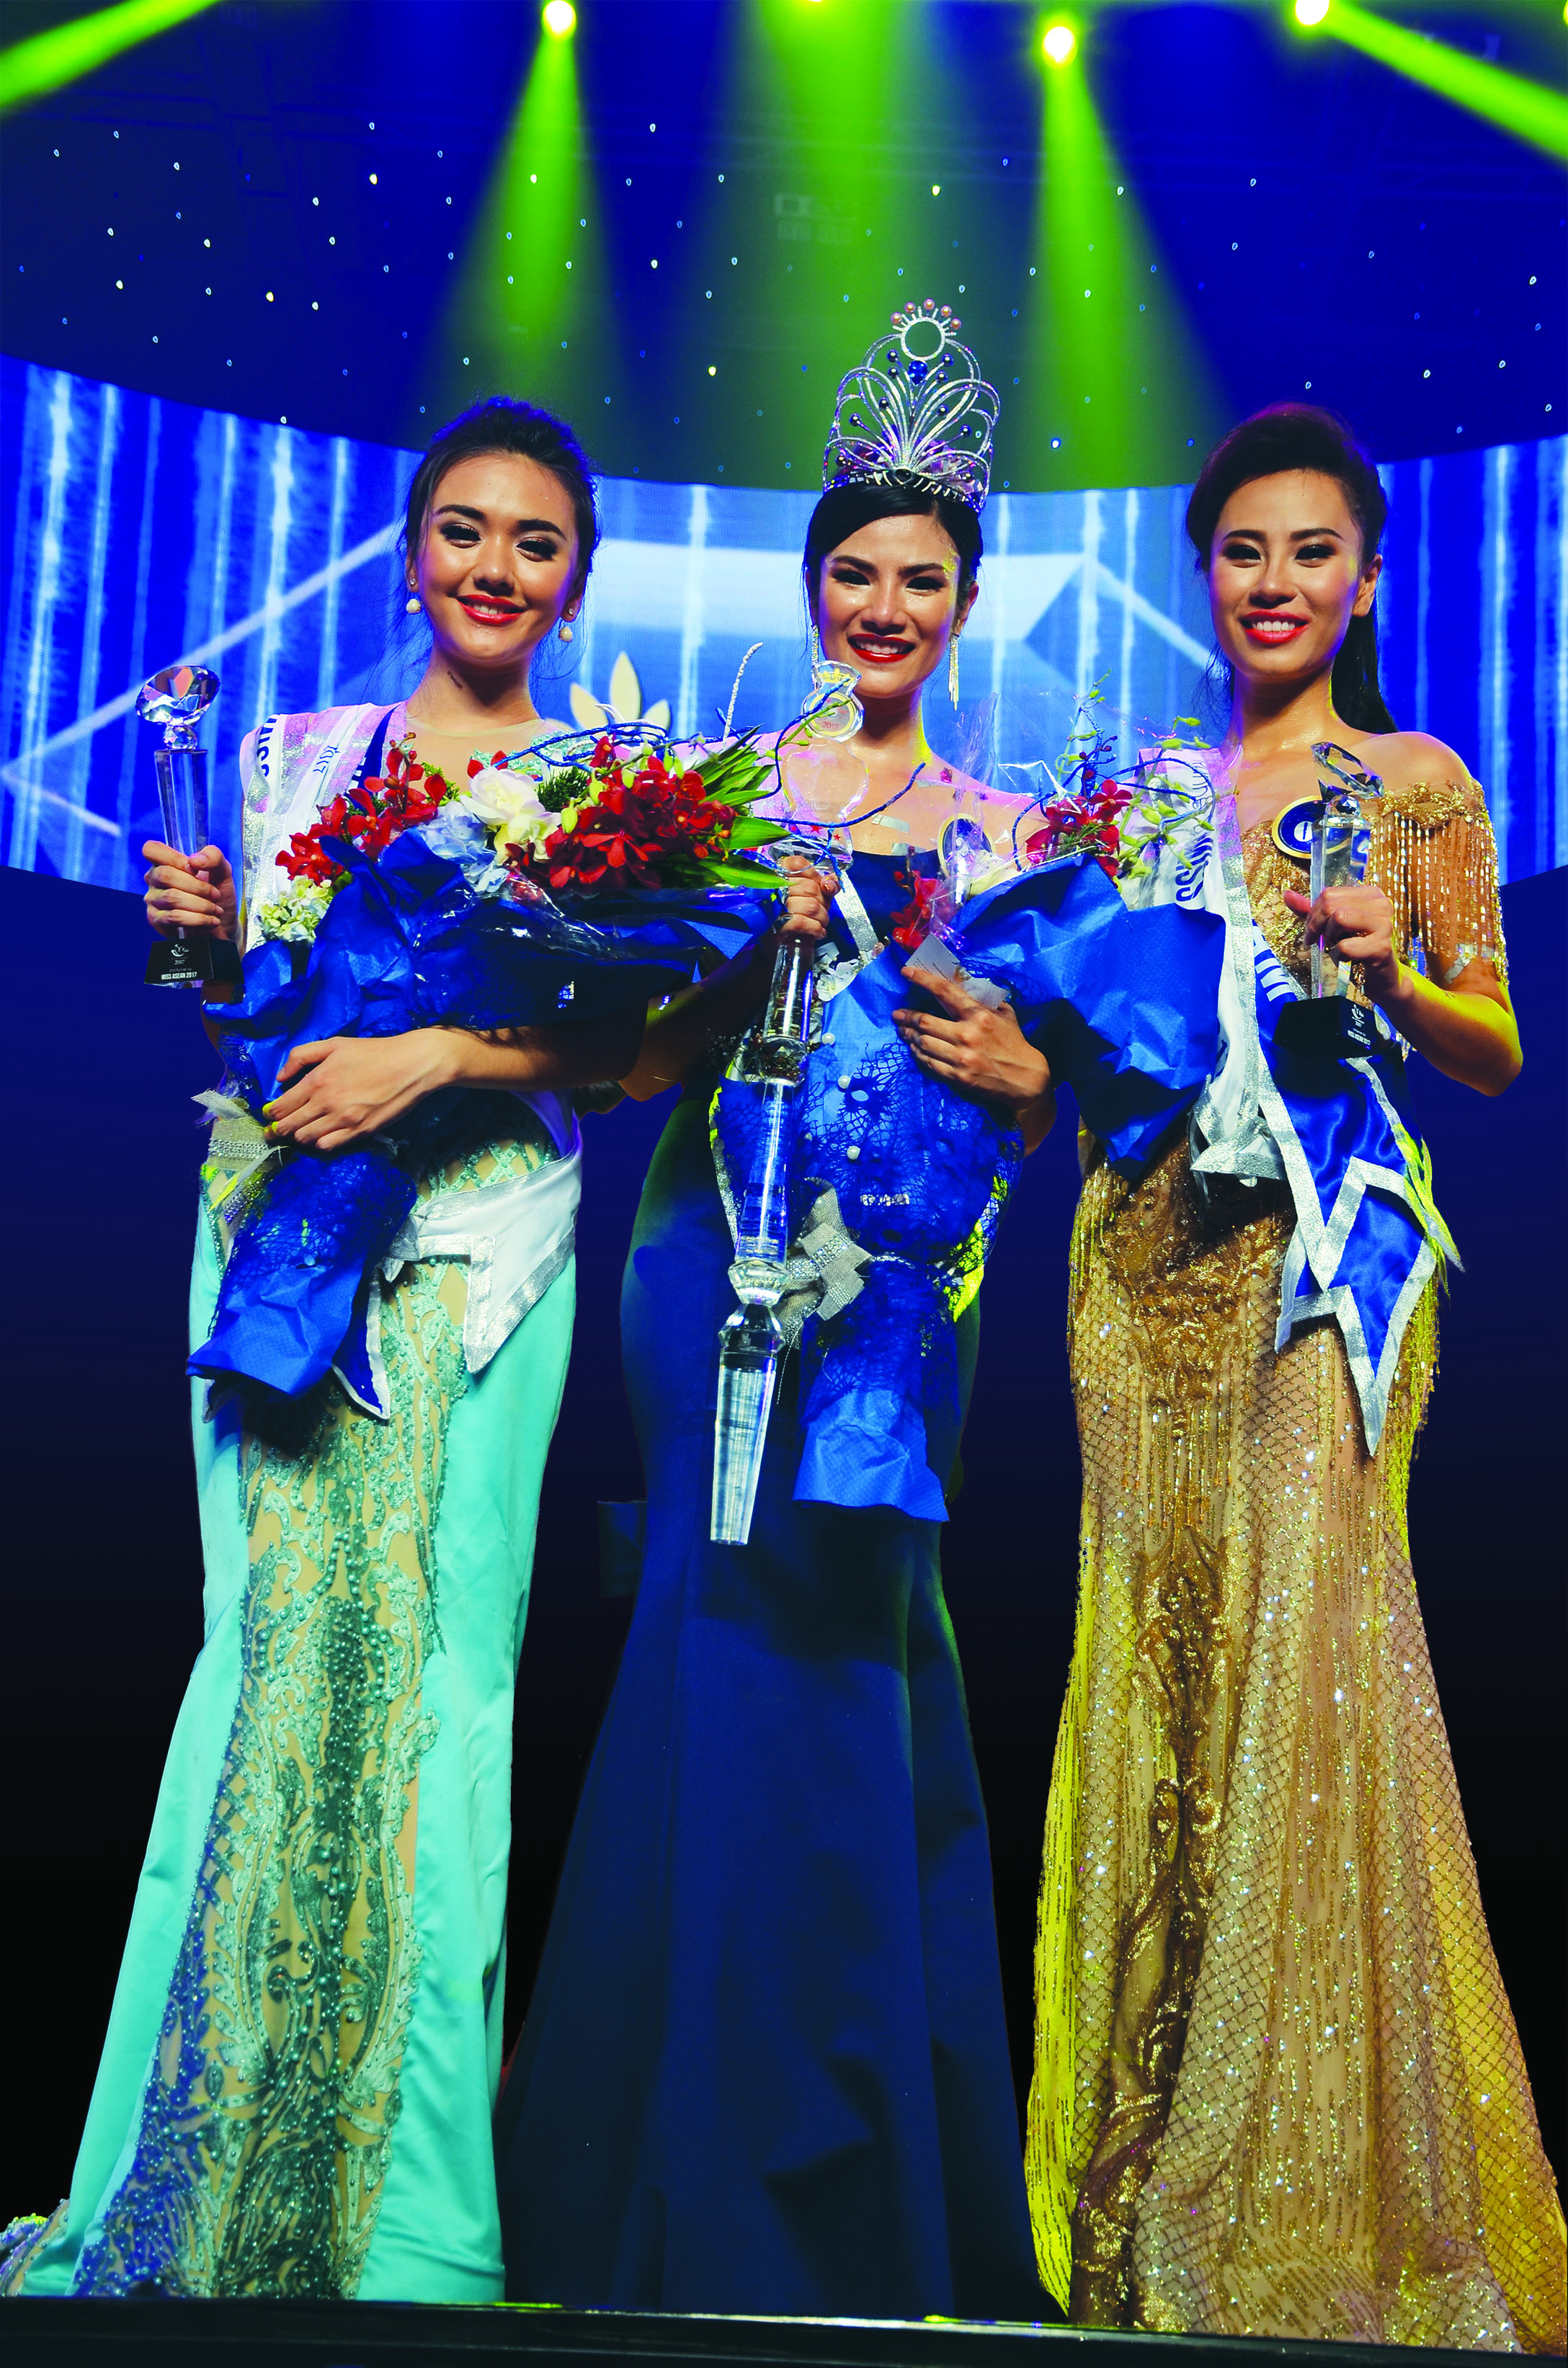 Meet the five beauties from Miss ASEAN Friendship 2017 at the online exchange